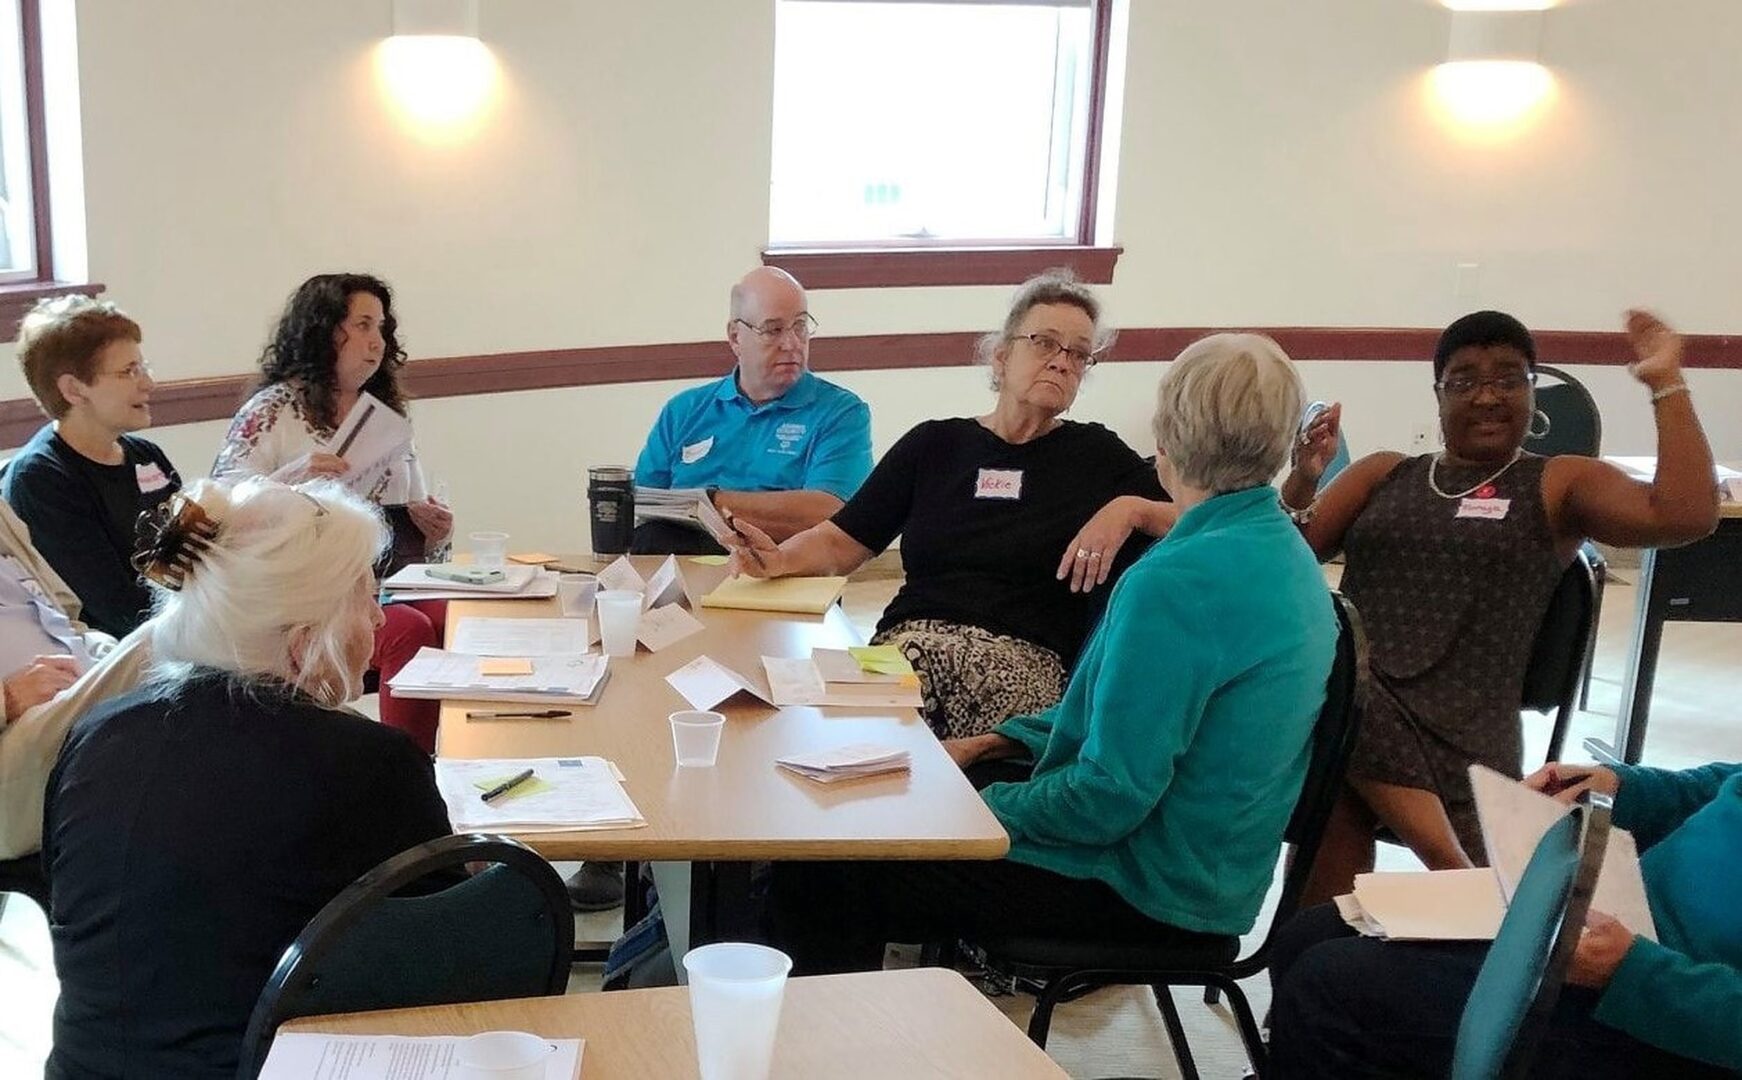 Urban Rural Action and Pennsylvania Prison Society implemented a Vera Institute of Justice-funded criminal justice reform program in Adams County, PA and Philadelphia in 2019. (Urban Rural Action)